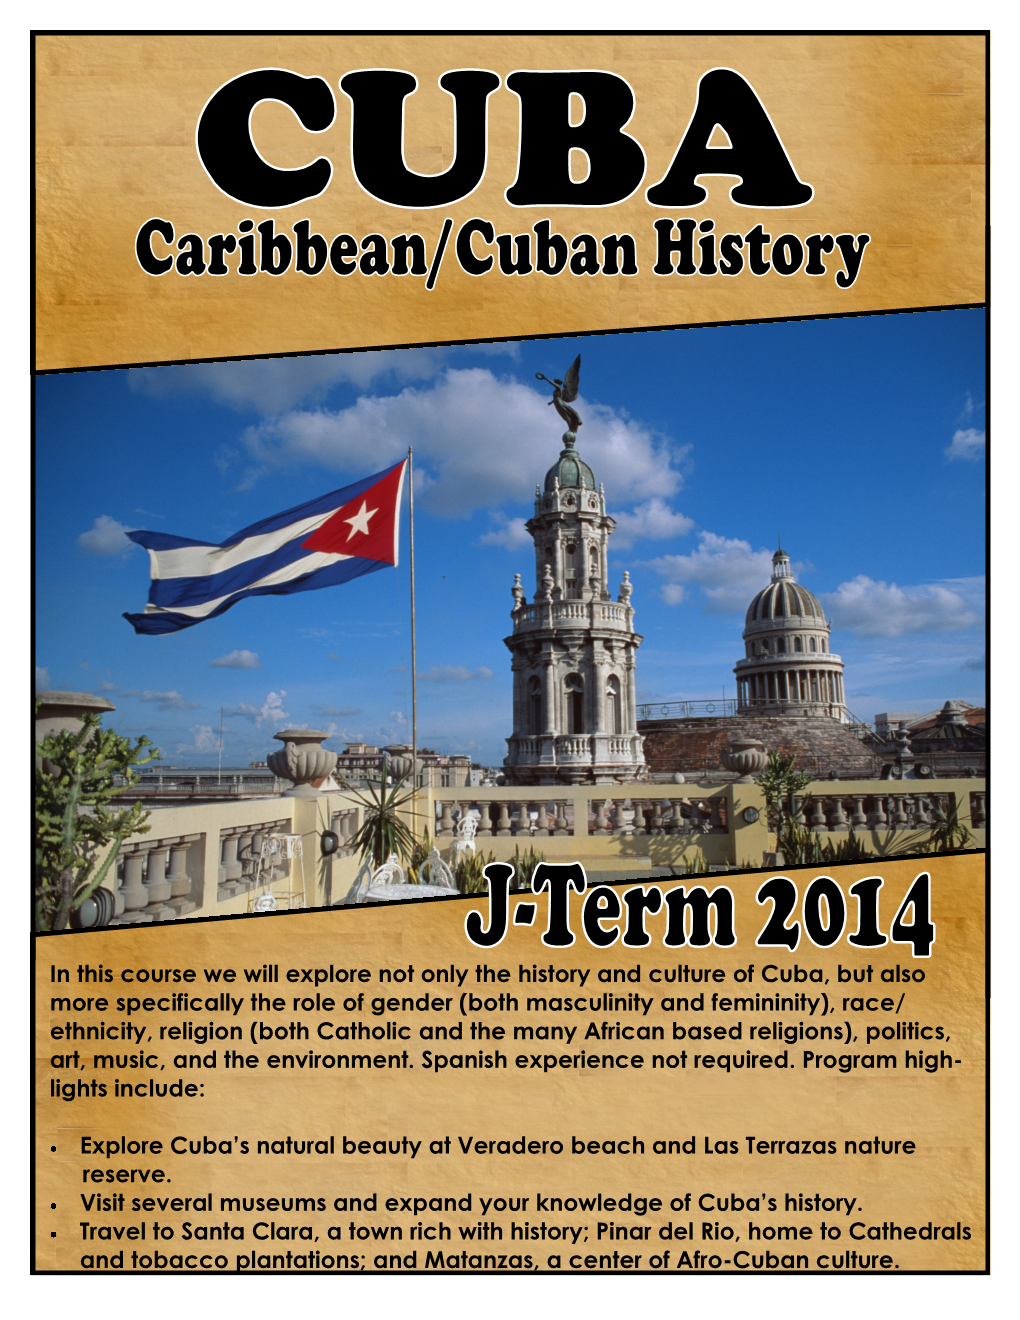 In This Course We Will Explore Not Only the History and Culture of Cuba, But